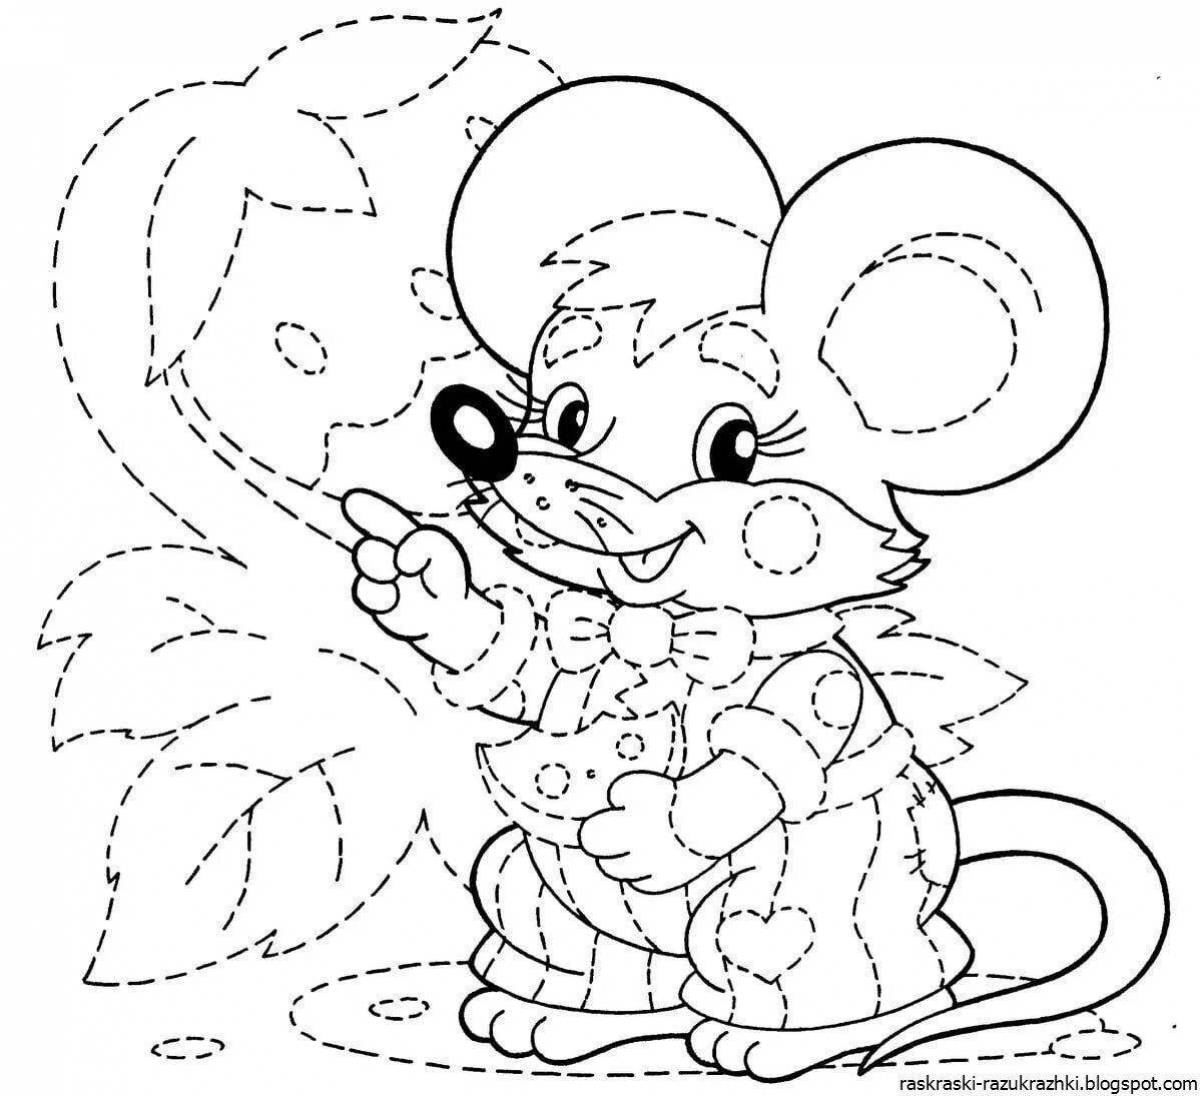 Magic mouse coloring book for 4-5 year olds